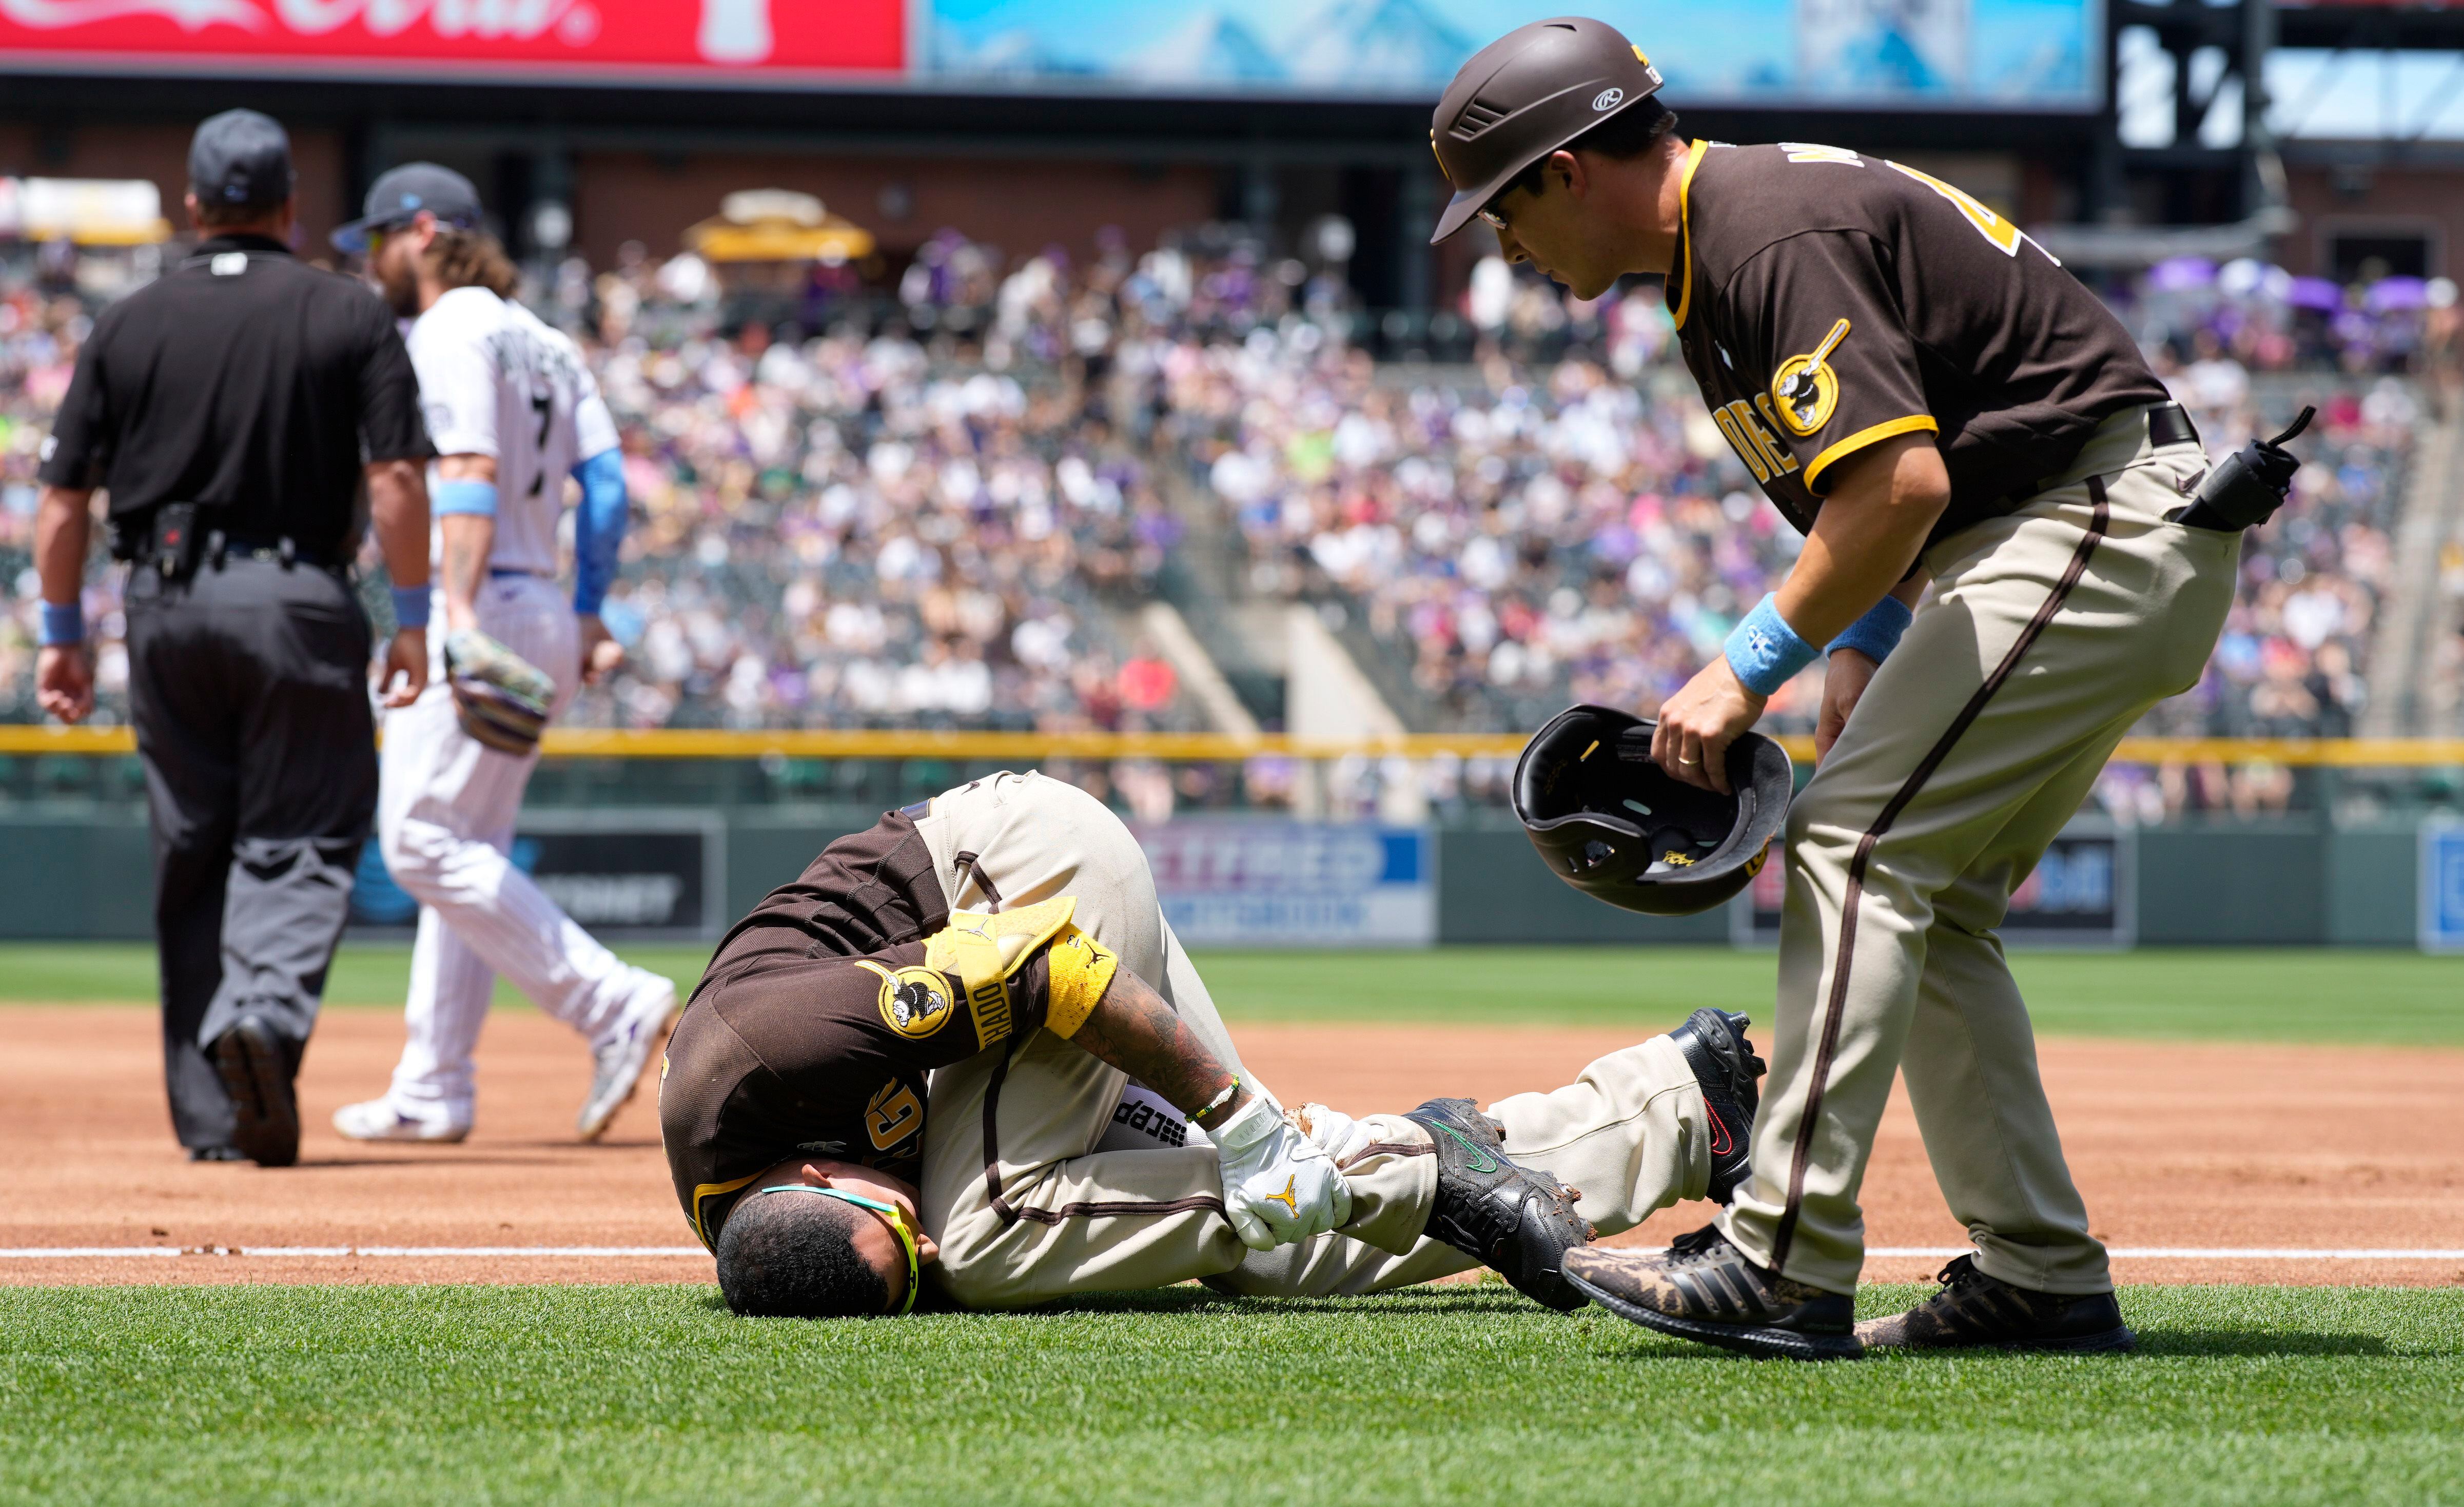 Padres slugger Machado headed to injured list with fractured left hand